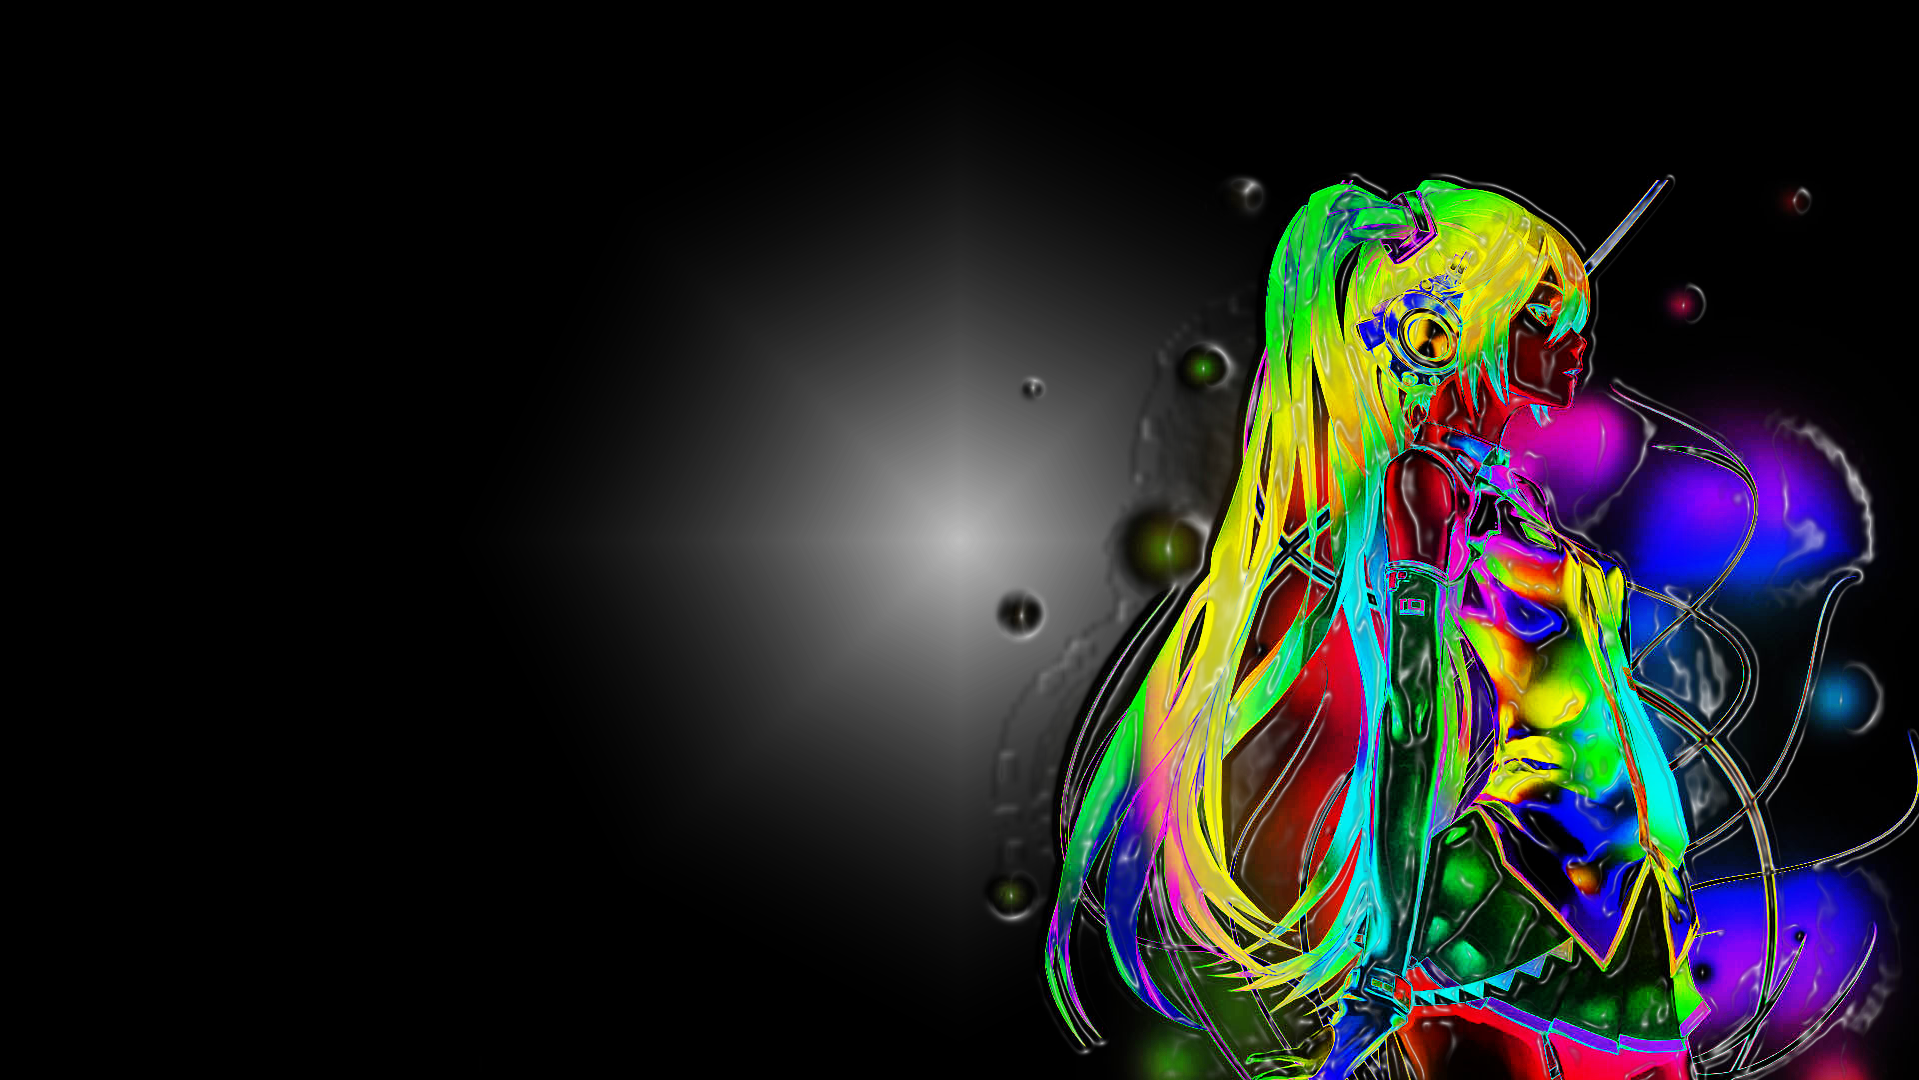 Anime Neon in 3D Wallpapers and Backgrounds Image